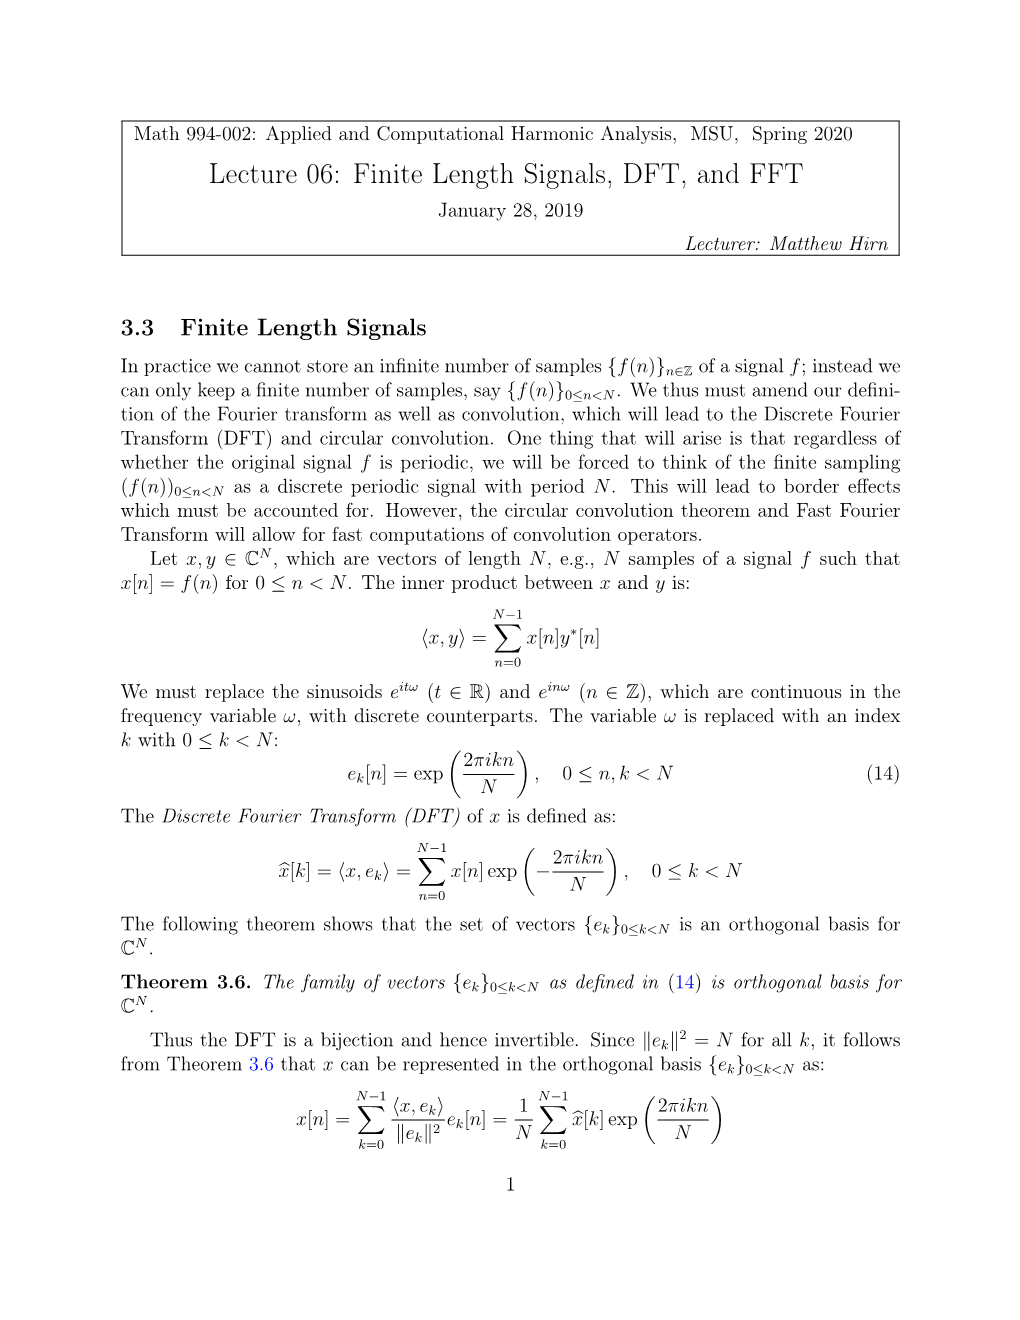 Lecture 06: Finite Length Signals, DFT, and FFT January 28, 2019 Lecturer: Matthew Hirn